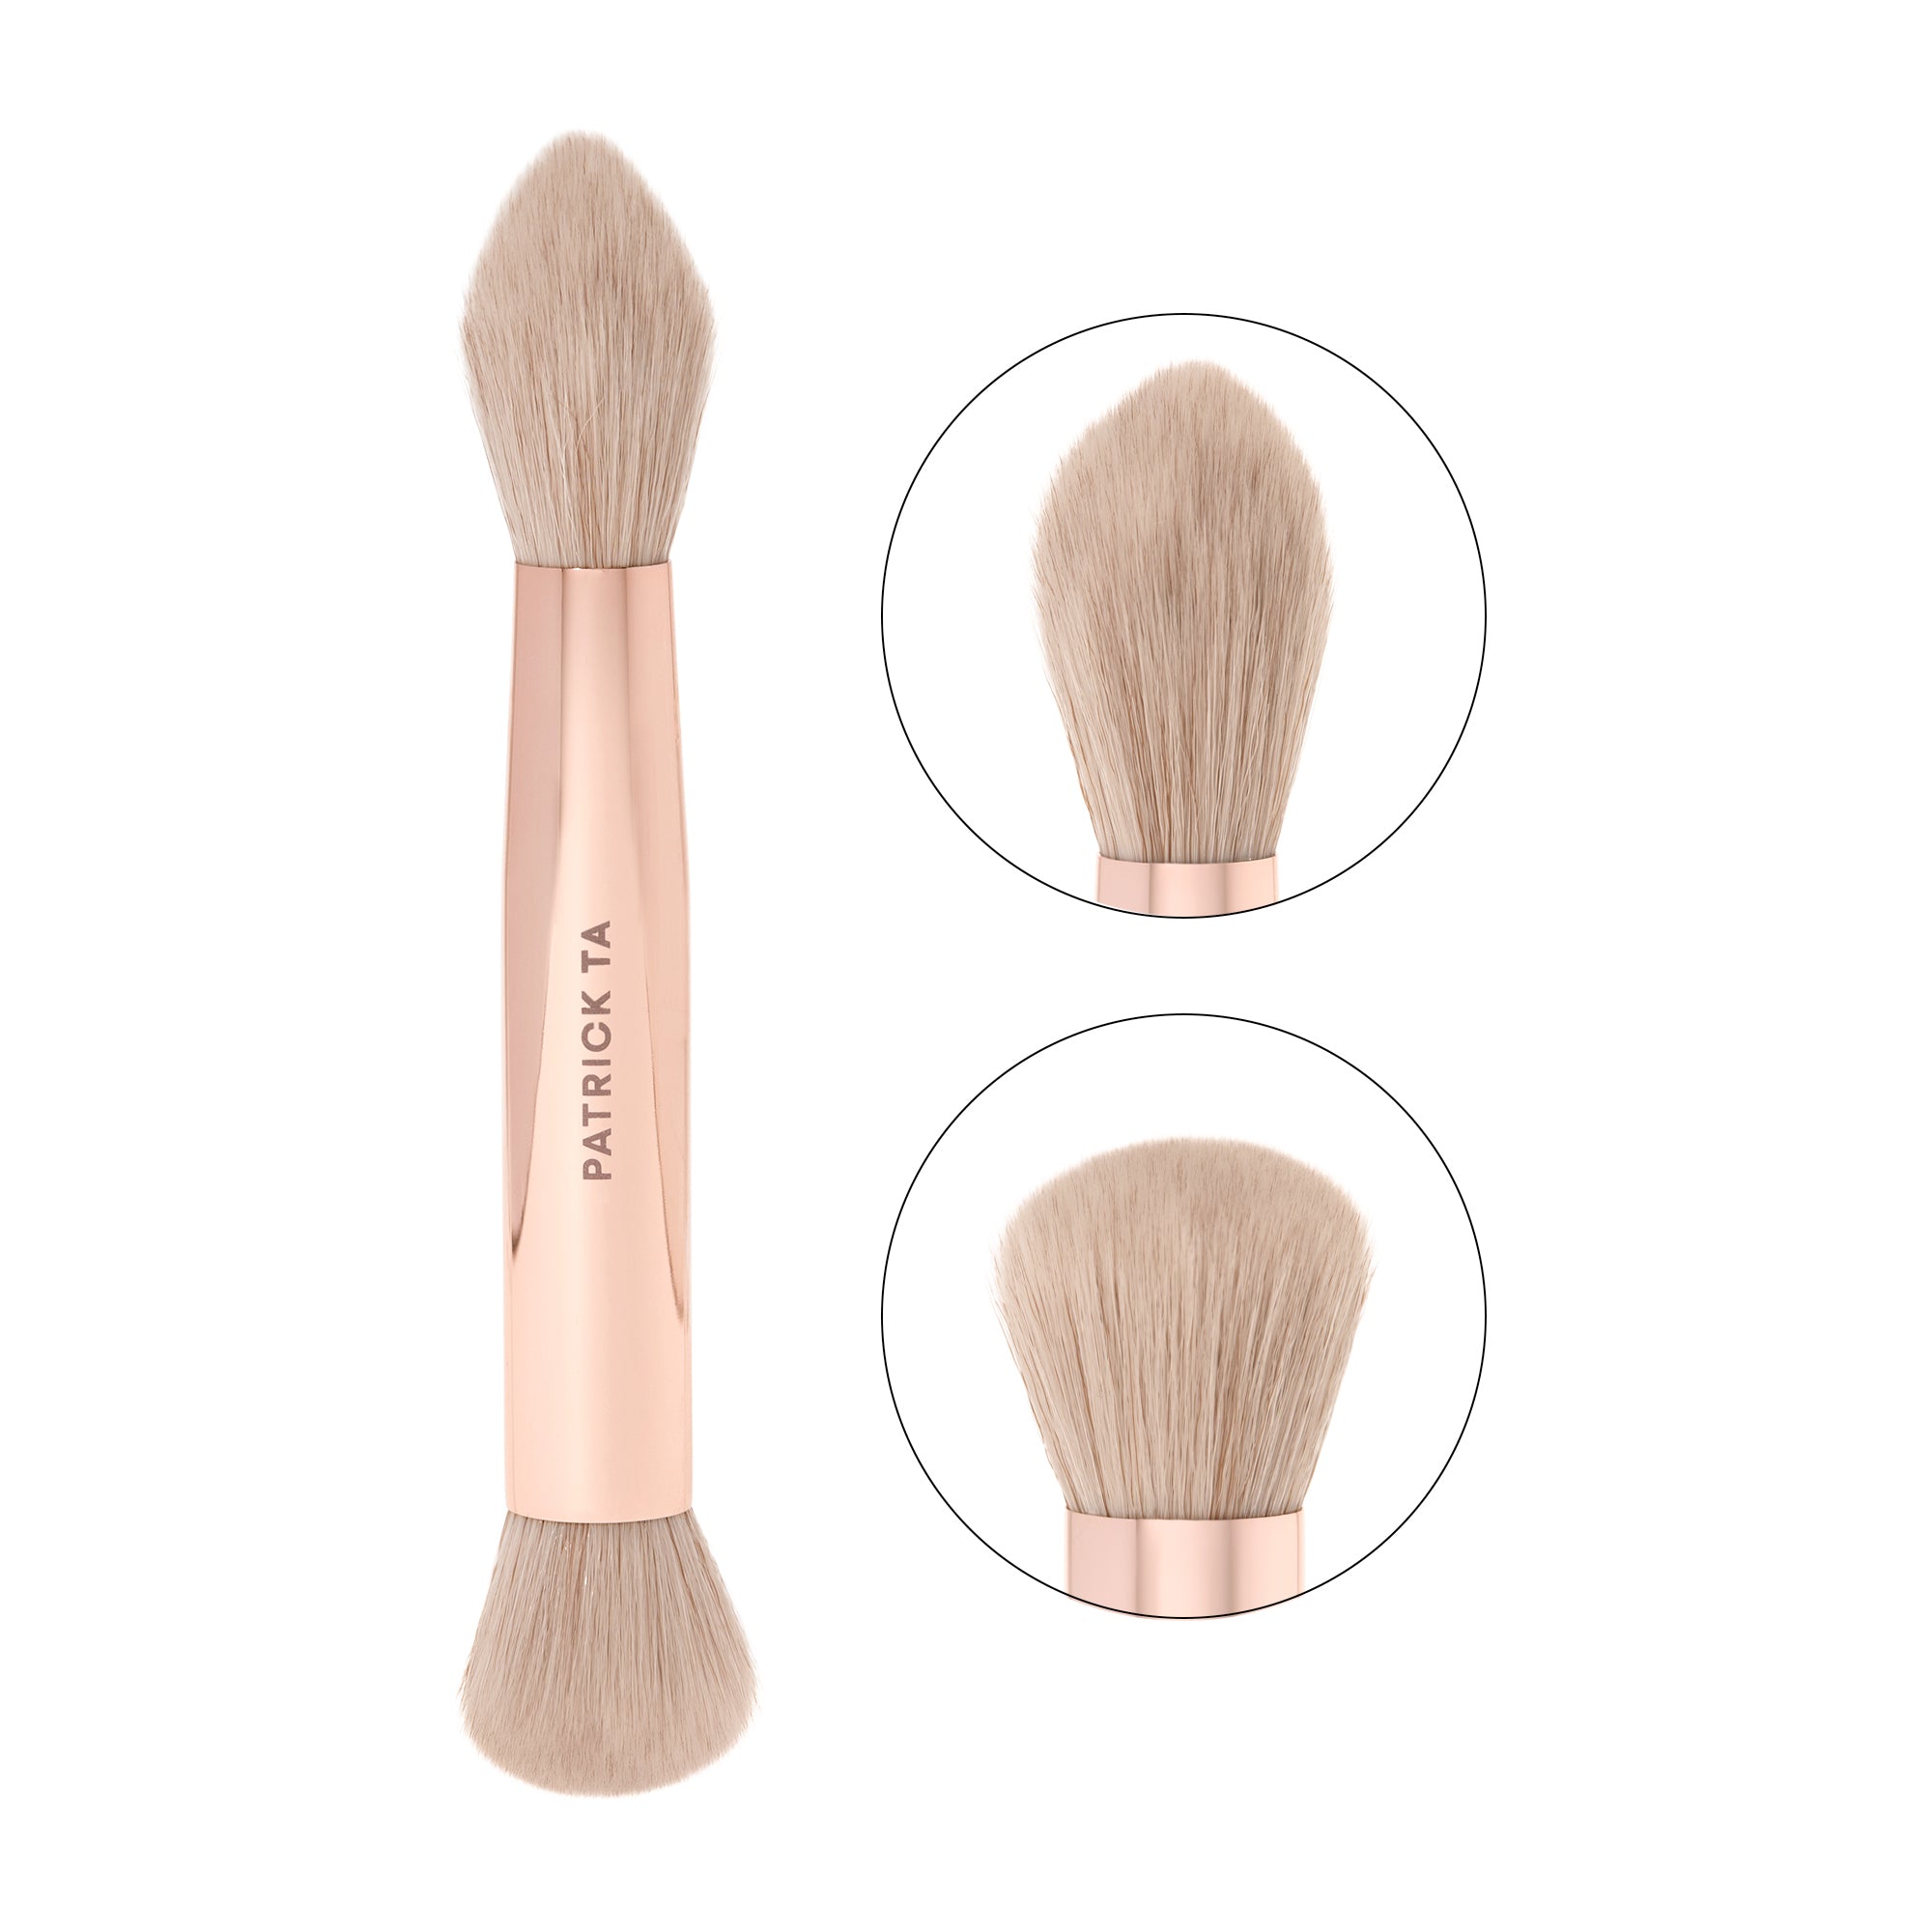 DUAL-ENDED COMPLEXION BRUSH NO 2